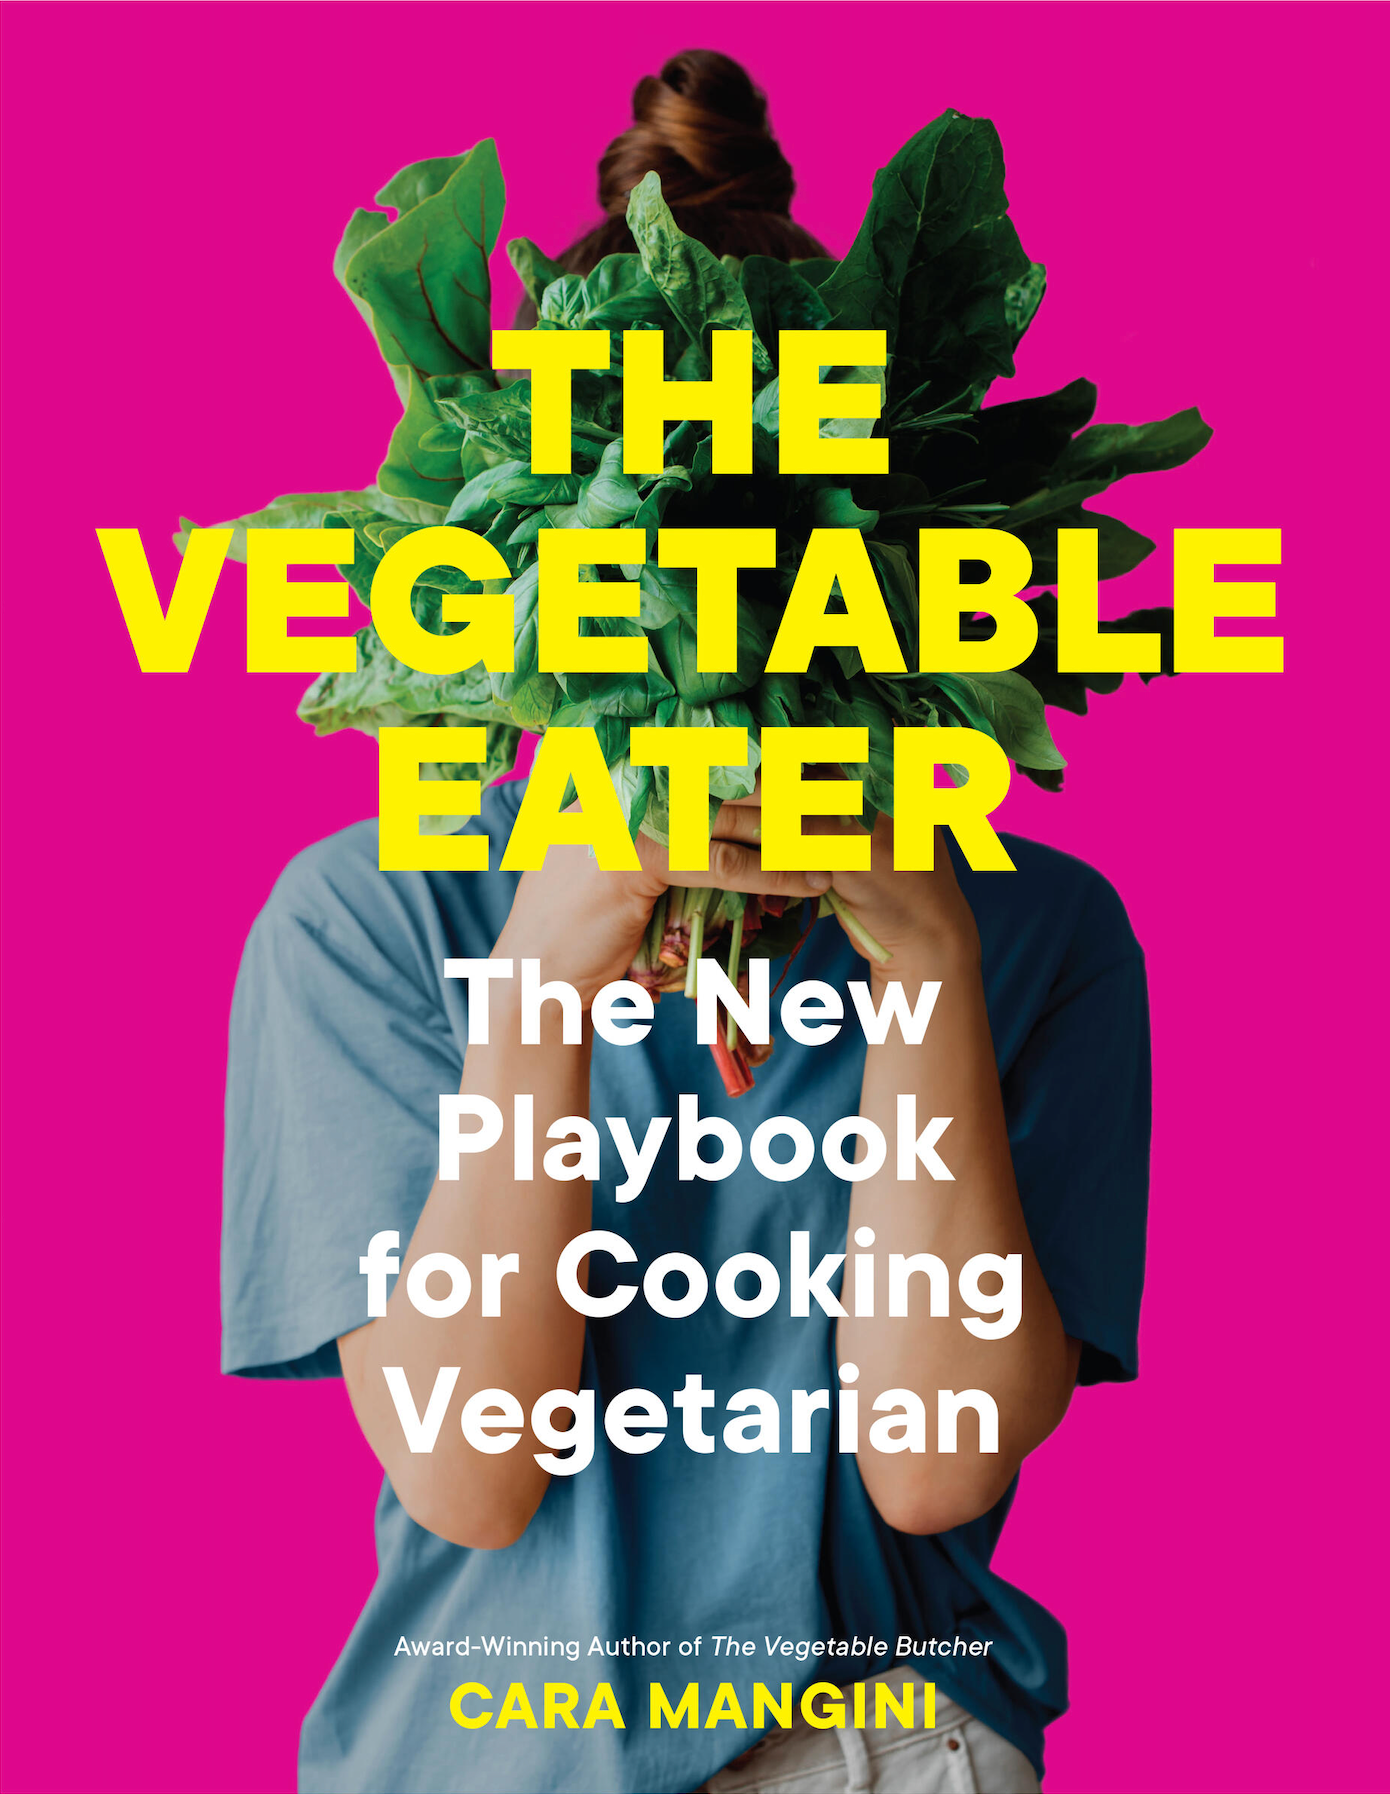 The Vegetable Eater: The New Playbook for Cooking Vegetarian (Cara Mangini) *Signed*